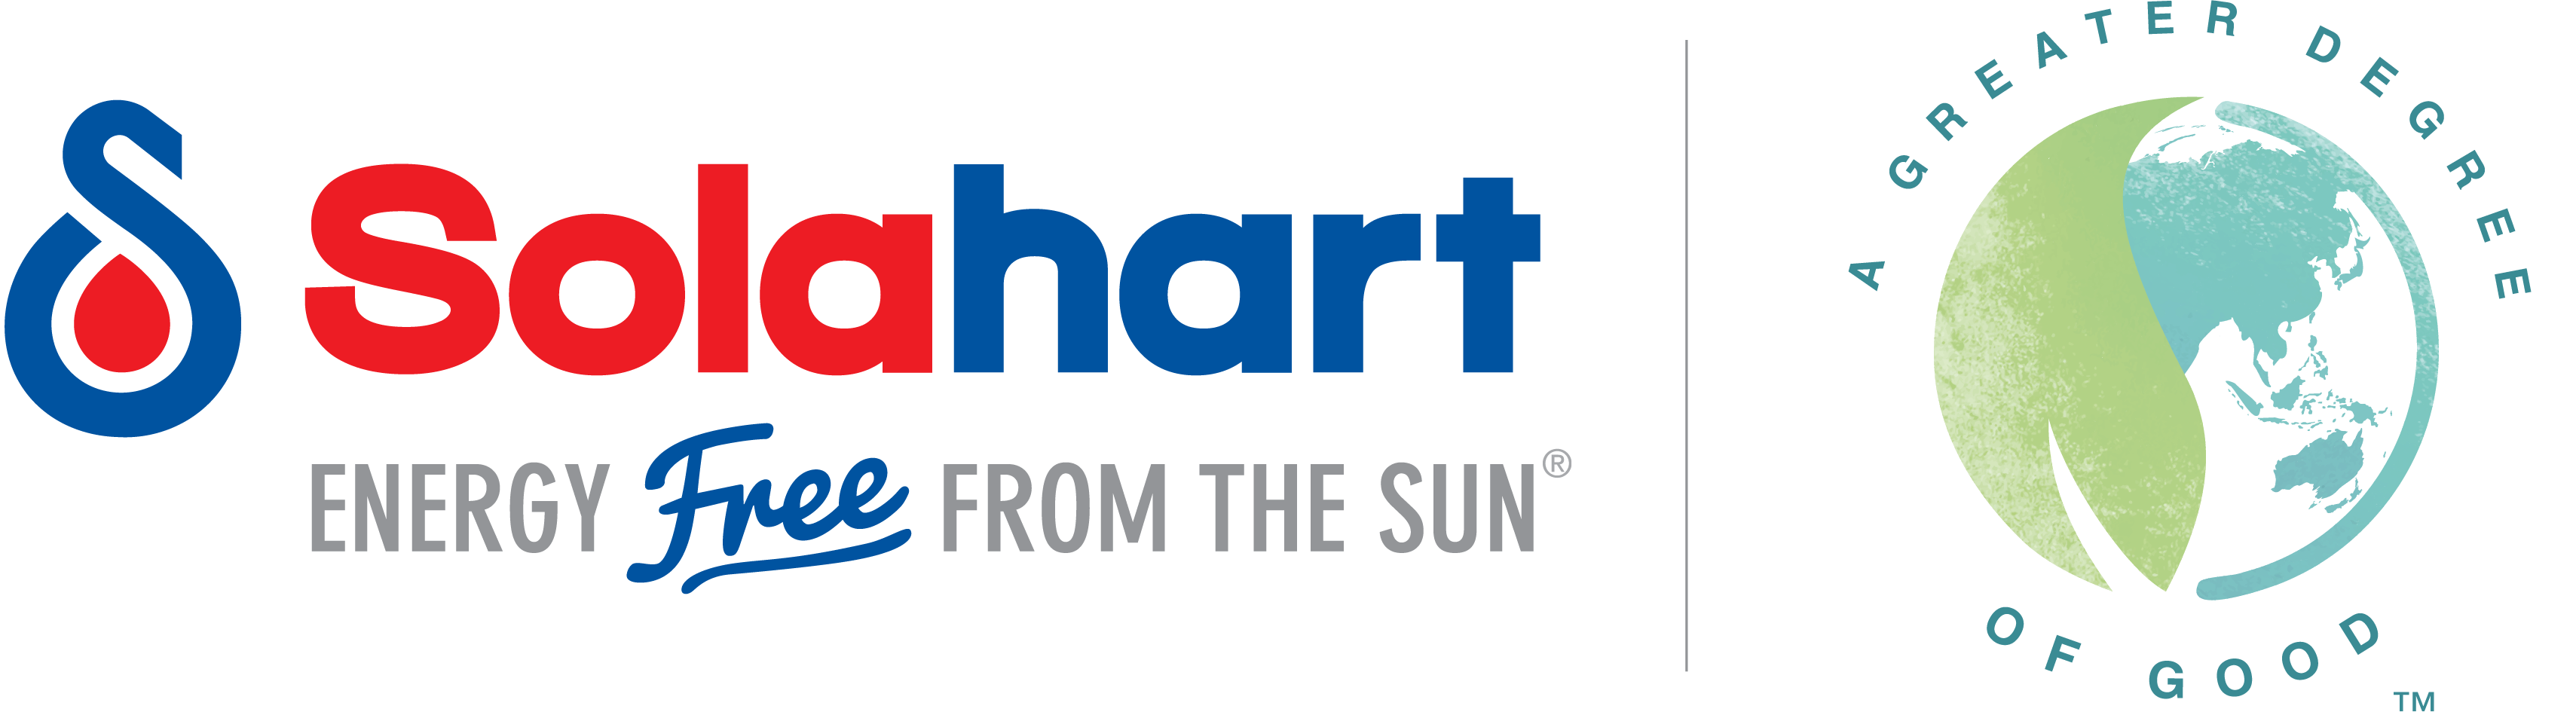 Solahart logo and A Greater Degree of Good logo